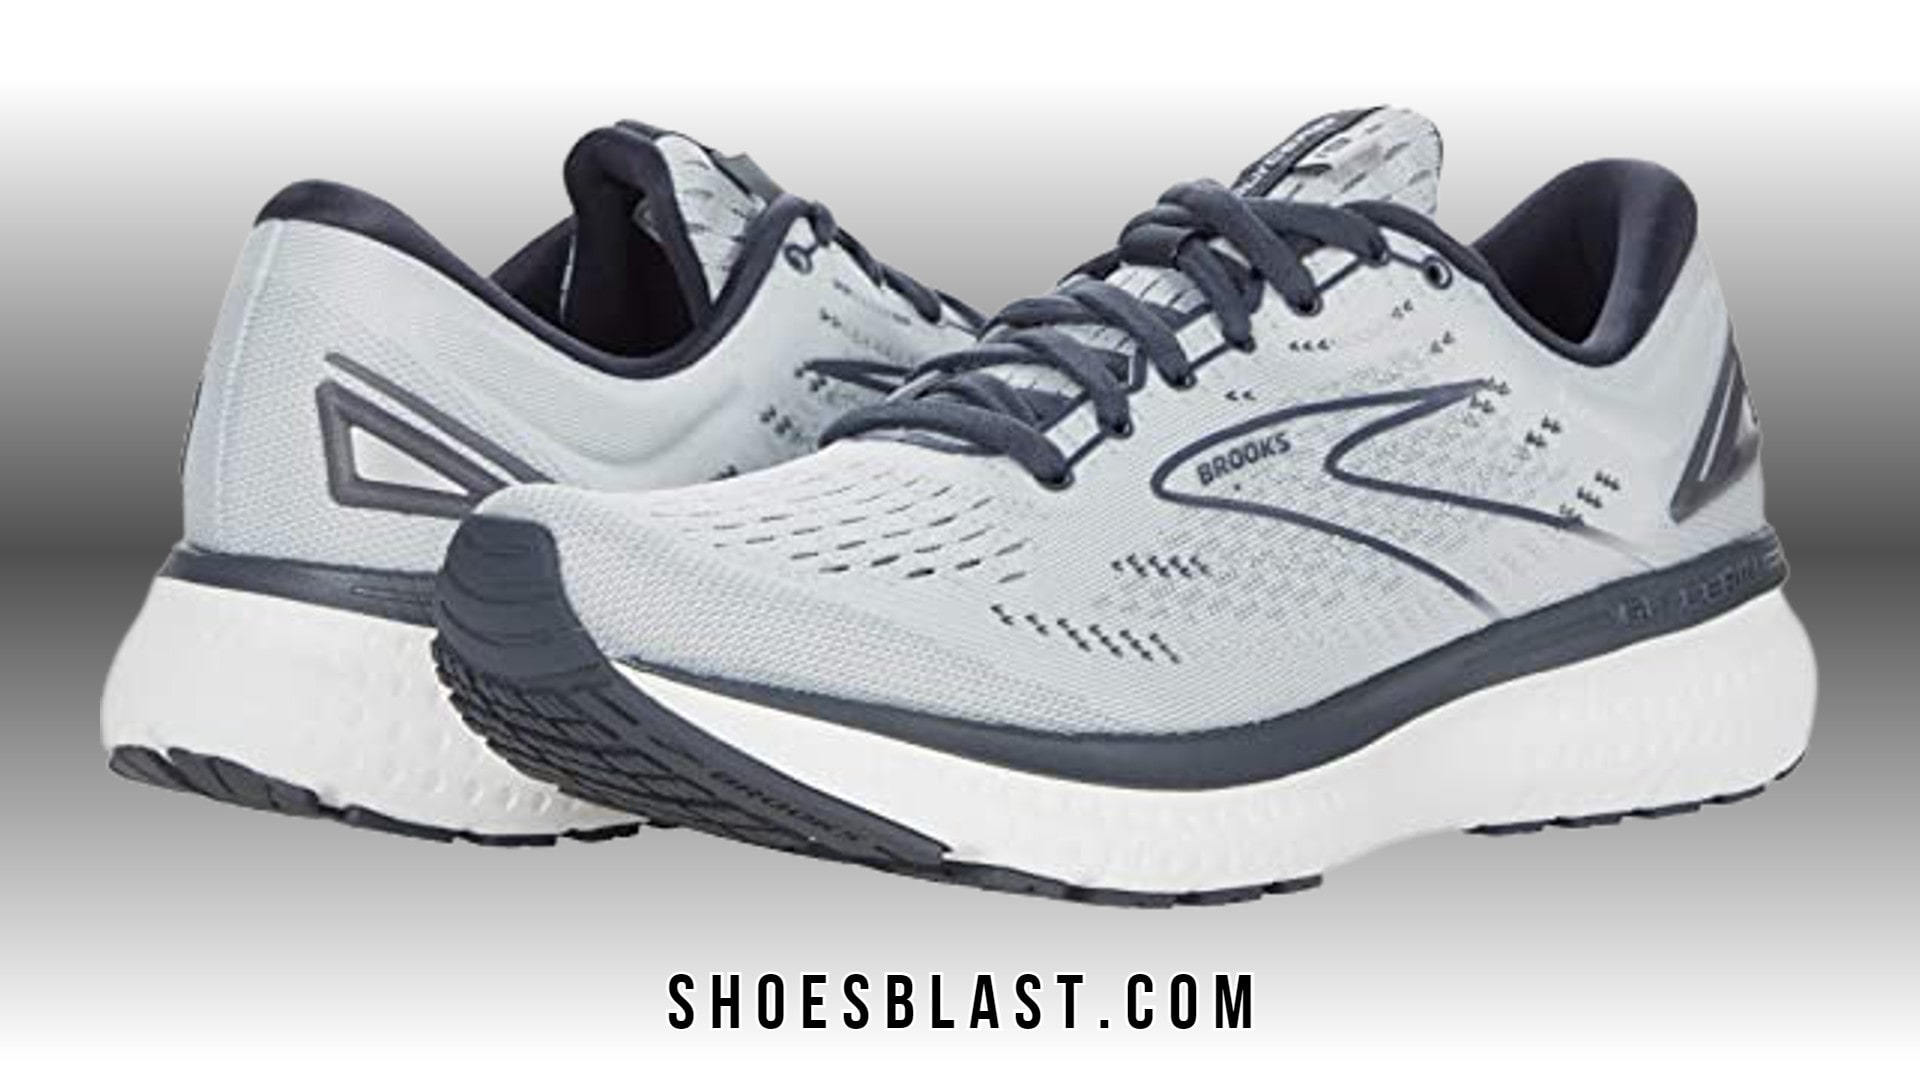 Running shoes for Ball of foot pain